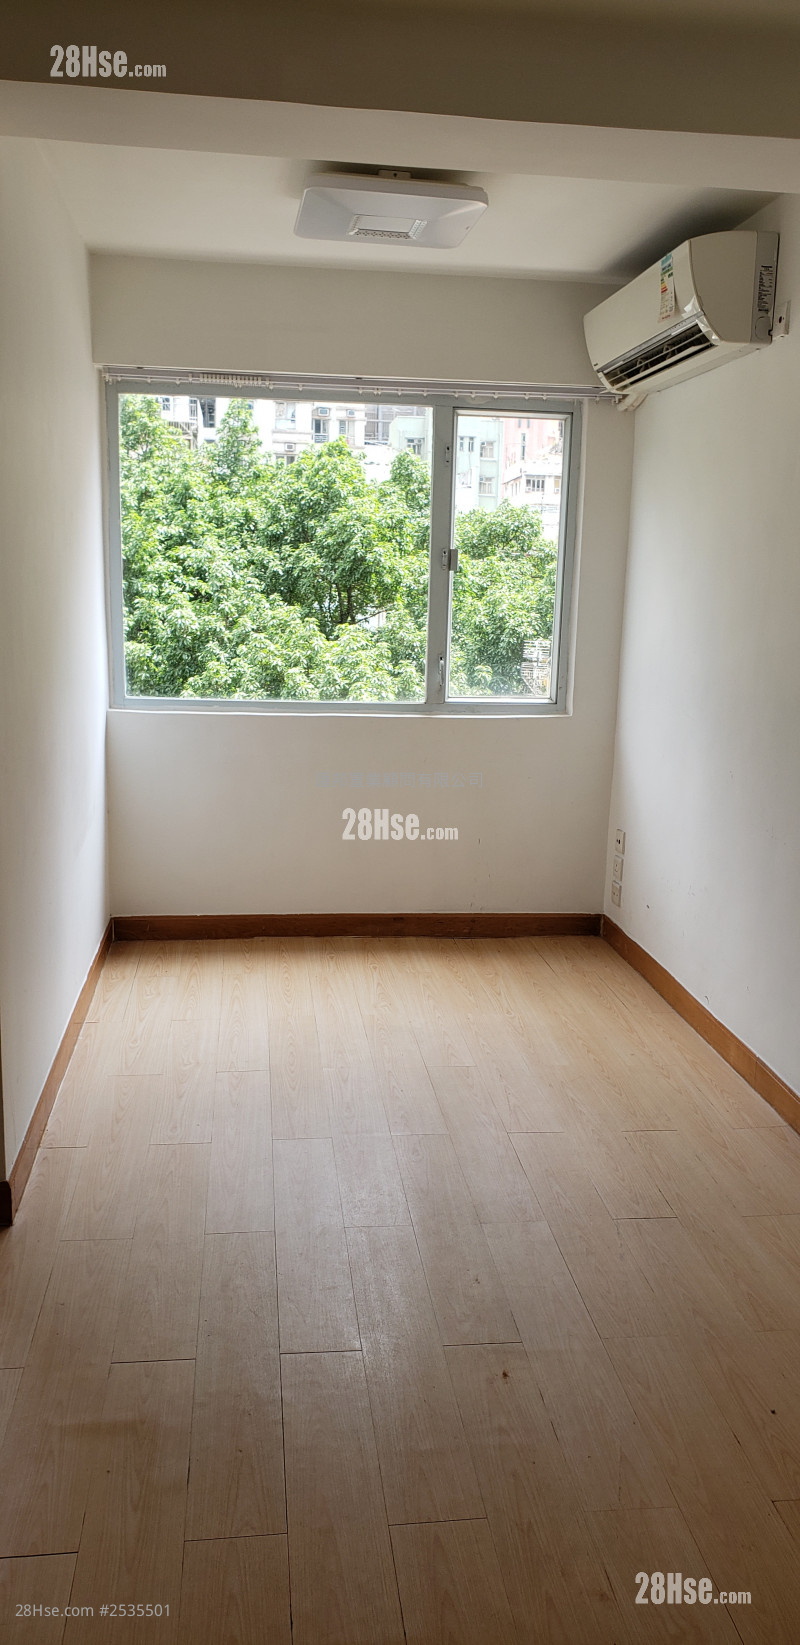 Tung Cheung Building Sell 1 bedrooms , 1 bathrooms 267 ft²